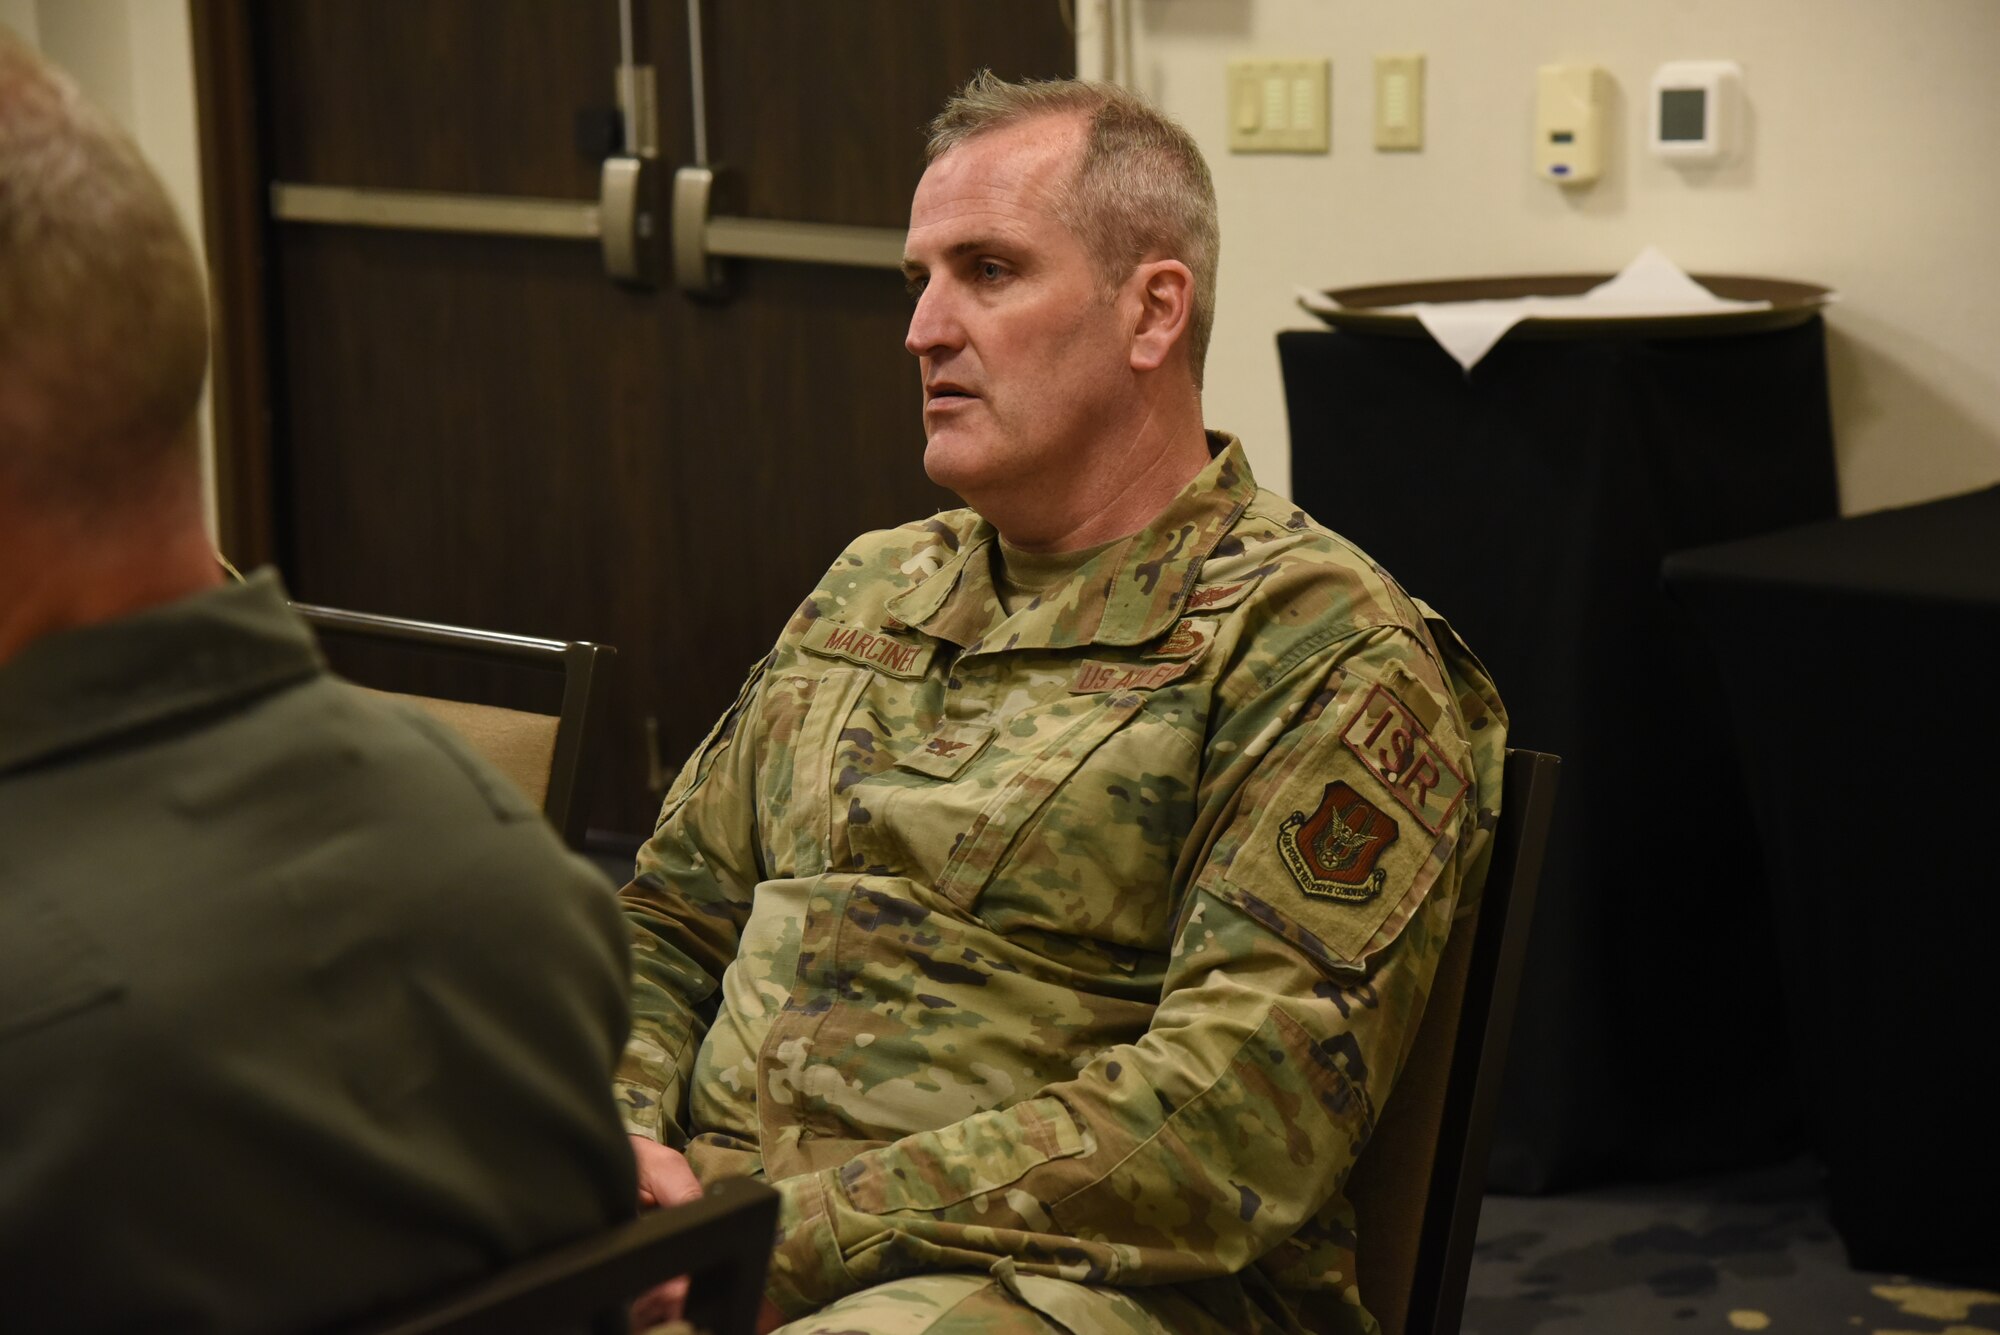 Col. Joseph Marcinek, 655th Intelligence, Surveillance and Reconnaissance Wing commander, attends a roundtable discussion during the Annual Commanders and Command Chiefs management and leadership review event held in Fort Worth, Texas, June 20-23. Tenth Air Force leaders were provided the opportunity to discuss and resolve challenges across the Numbered Air Force. (U.S. Air Force photo by 2nd Lt. Mary A. Andom)